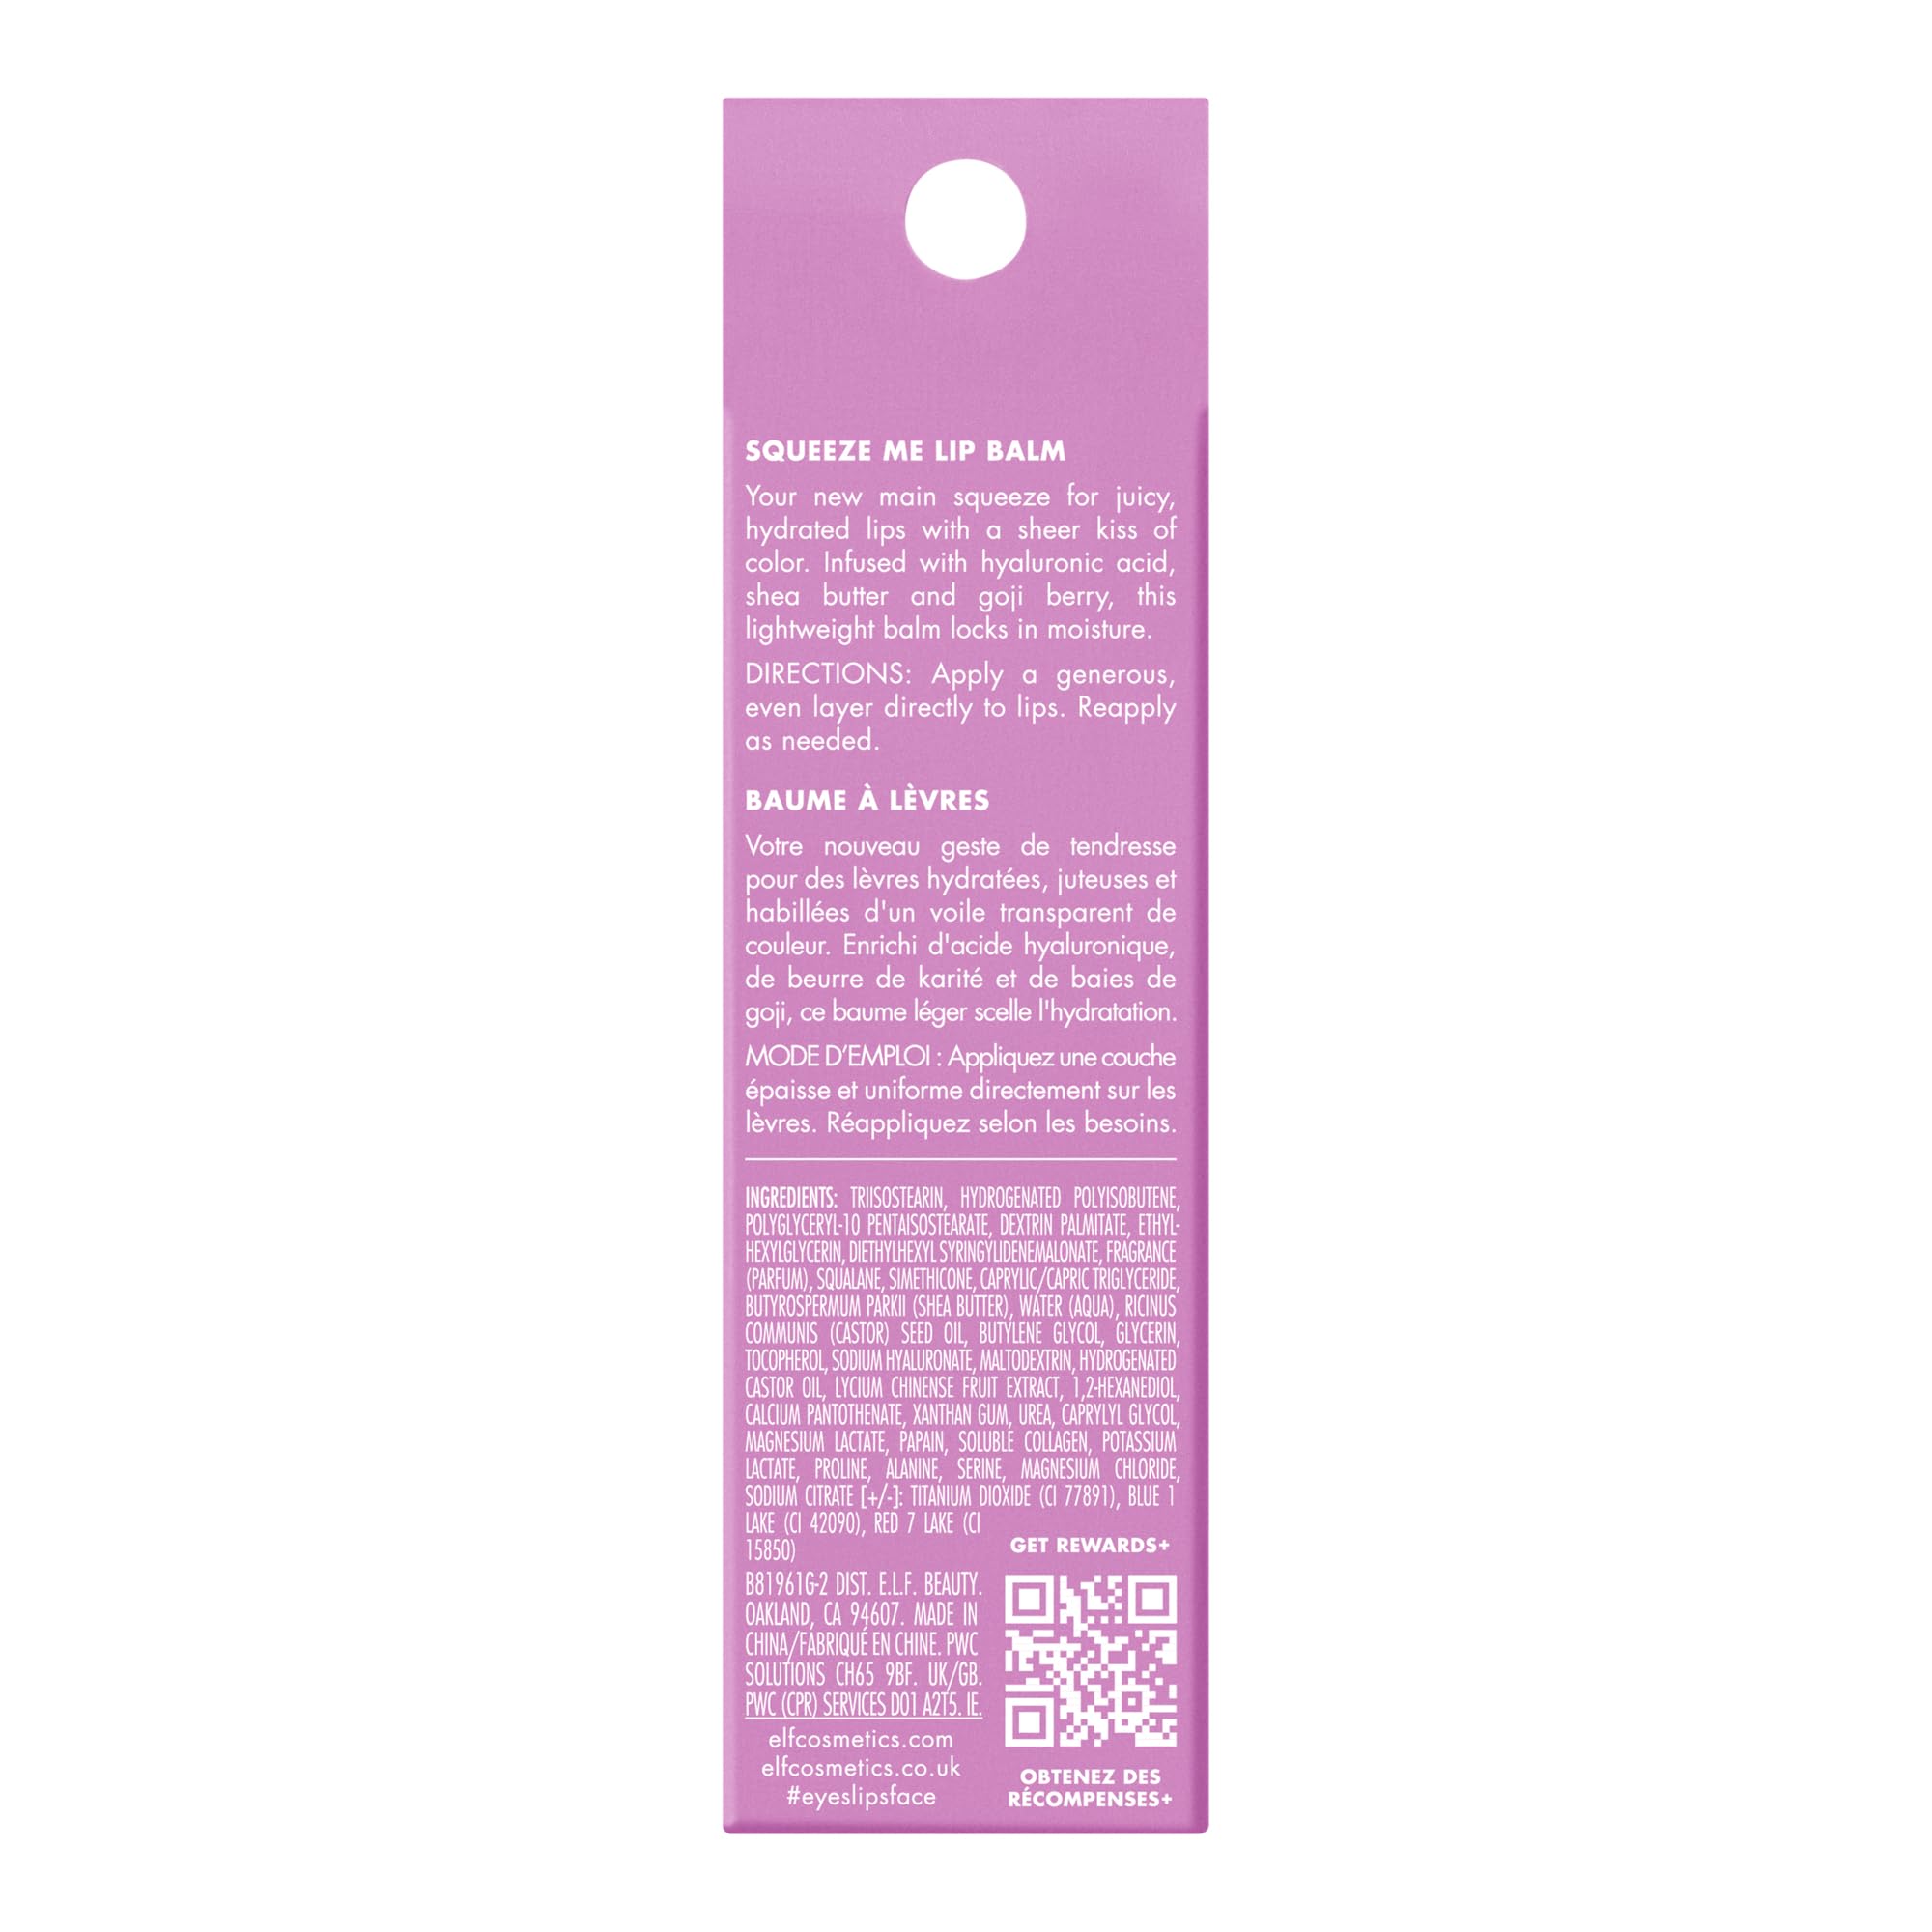 e.l.f. Squeeze Me Lip Balm, Moisturizing Lip Balm For A Sheer Tint Of Color, Infused With Hyaluronic Acid, Vegan & Cruelty-free, Grape